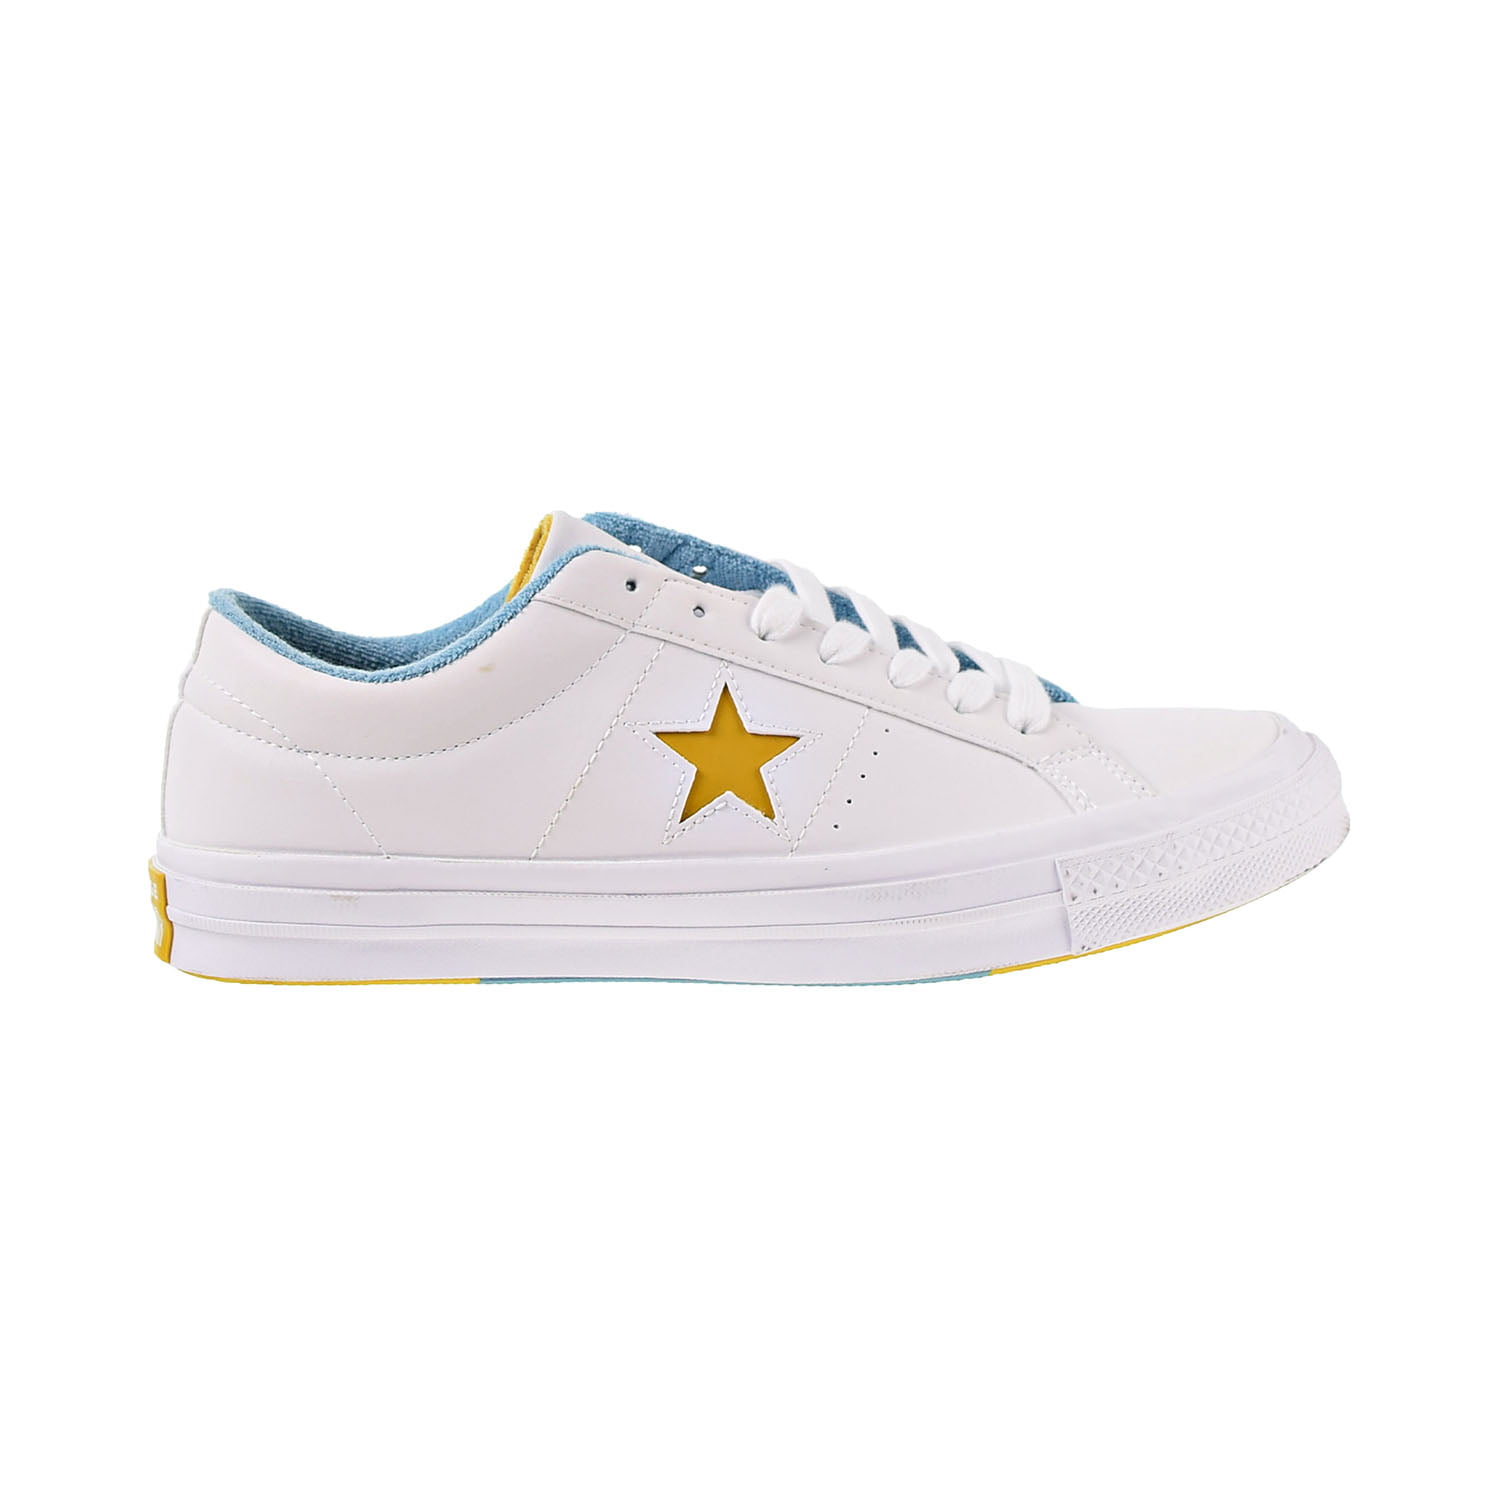 Converse One Star Ox Men's Shoes White-Mineral Yellow 160593C